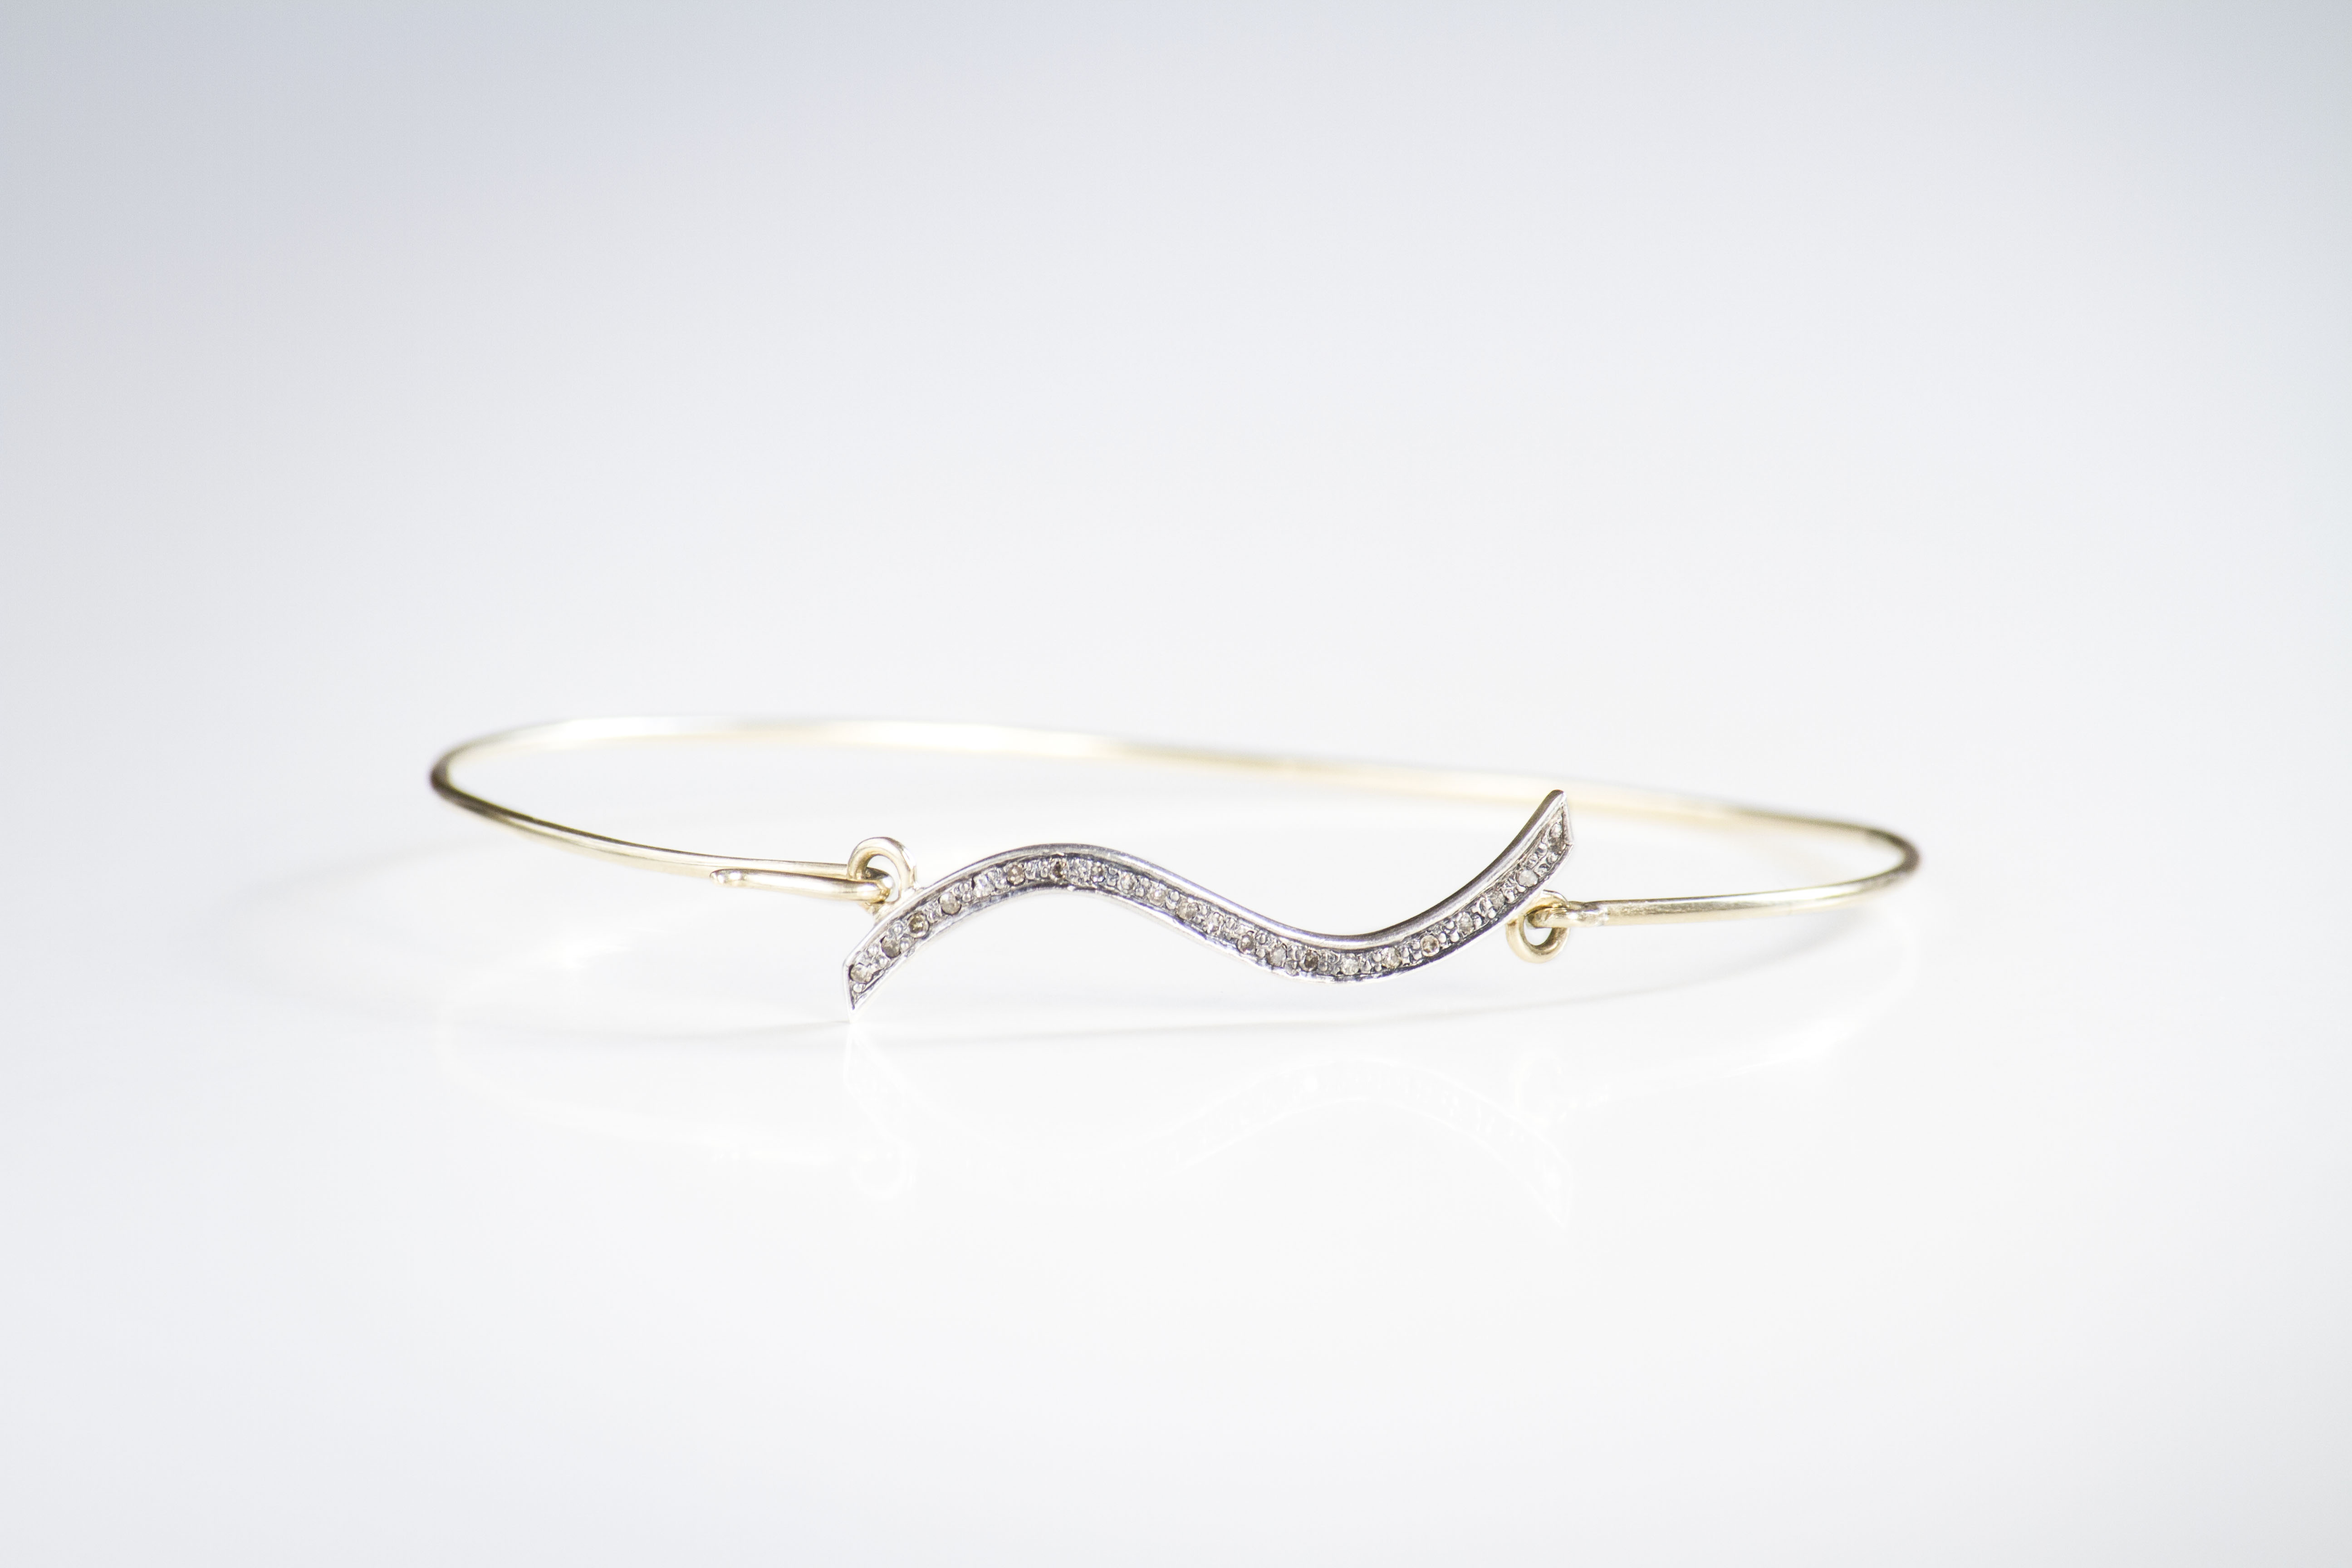 wave bracelet Delicate bangle in 14k yellow gold with diamond pave